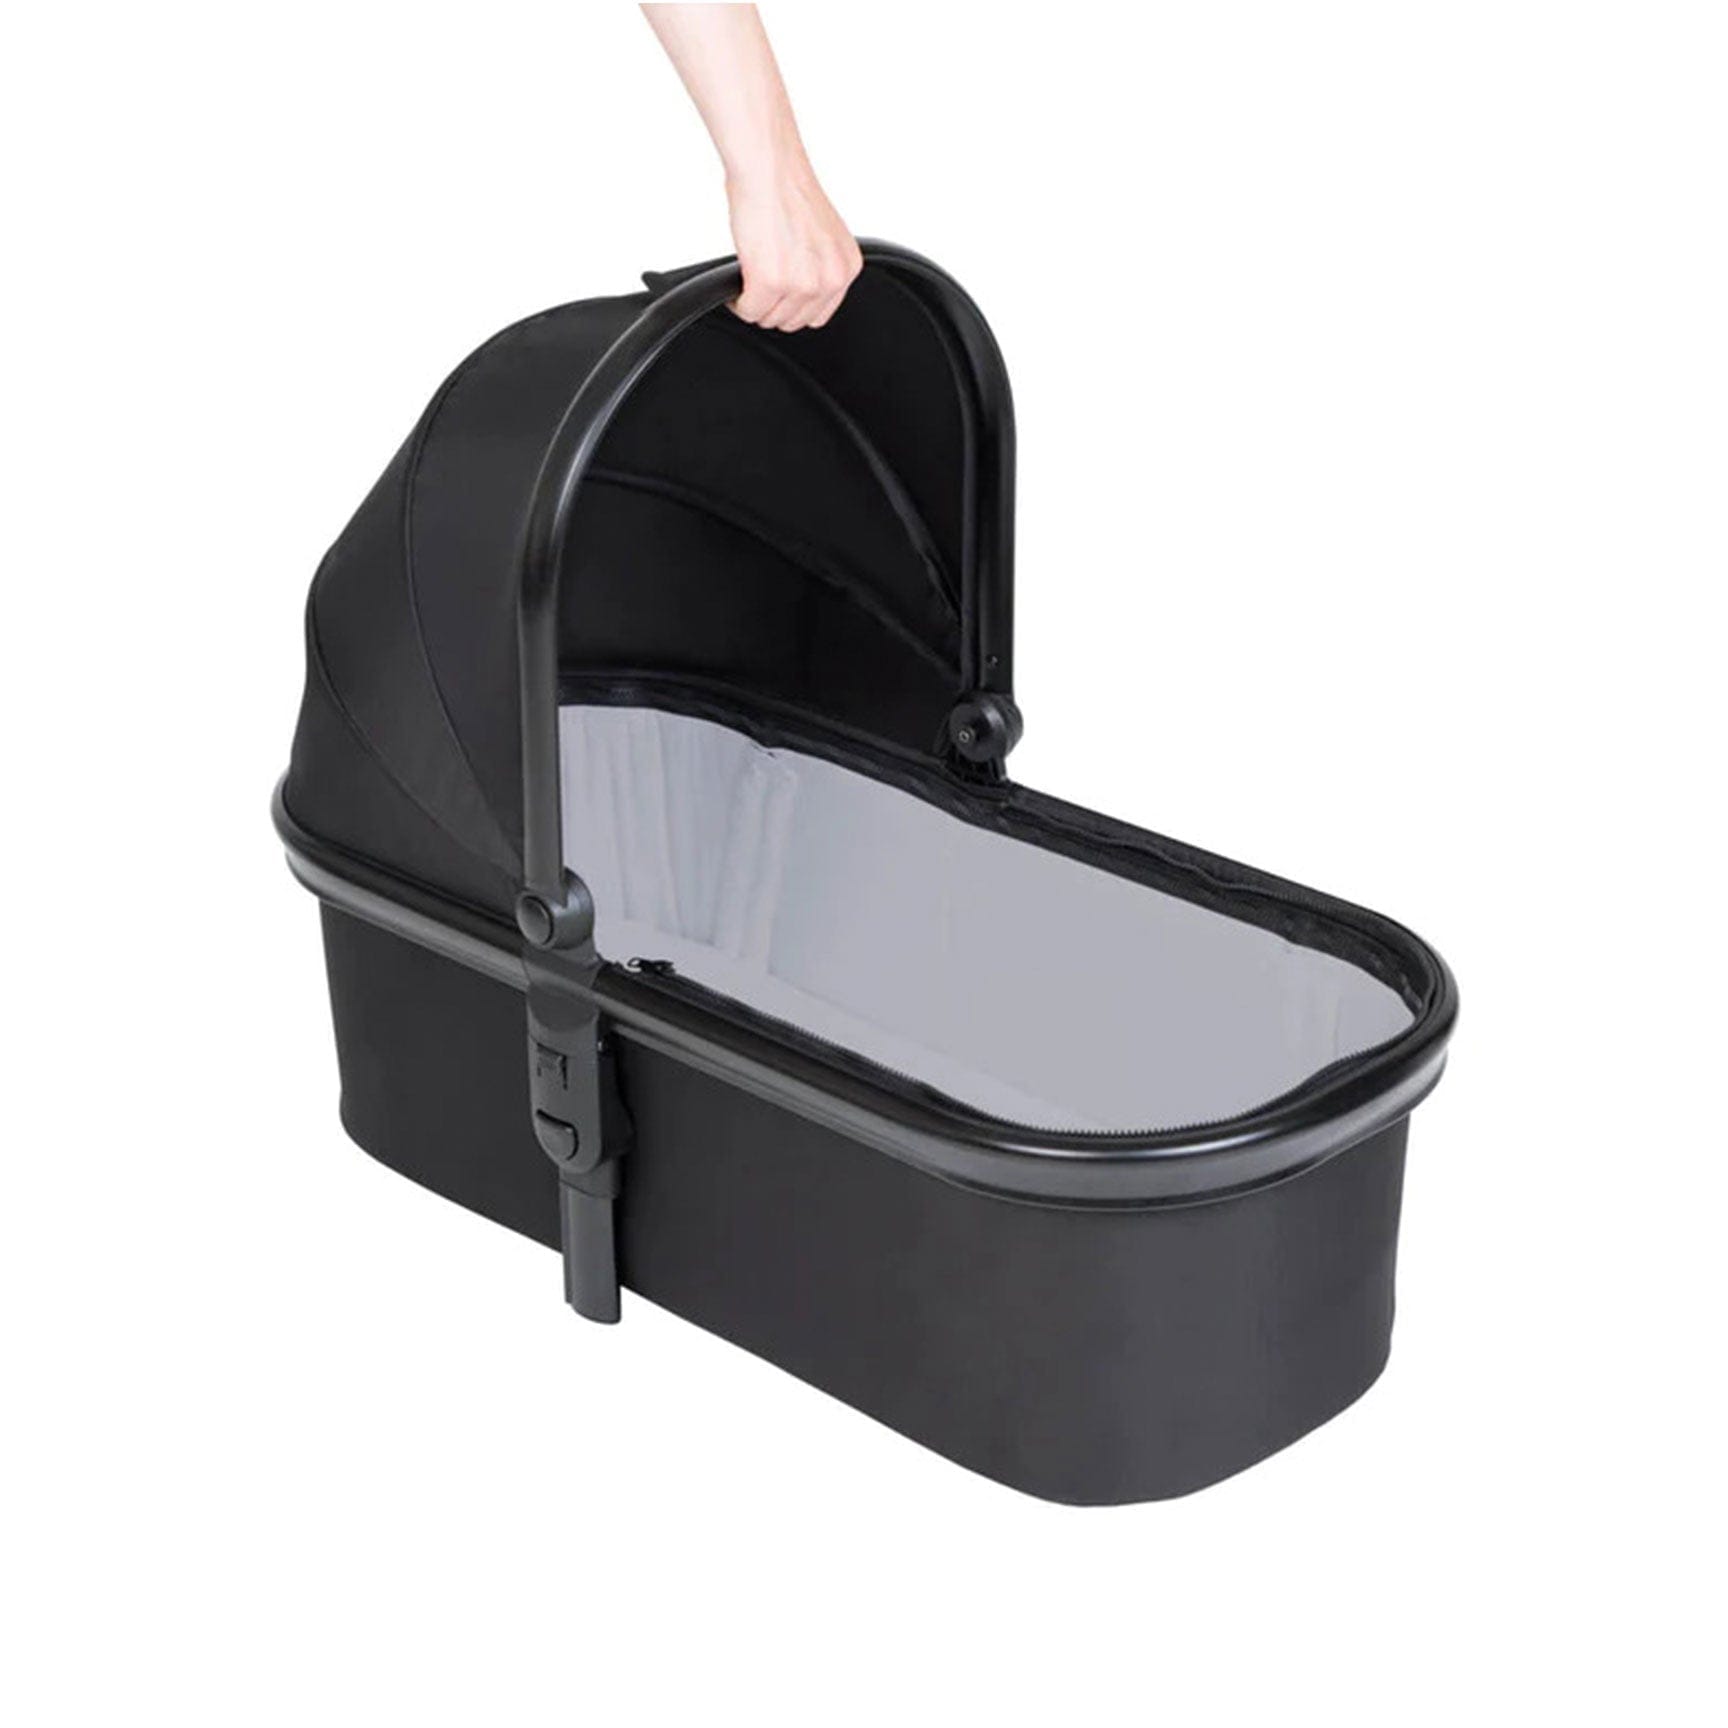 Phil & Teds Chassis & Carrycots Phil & Teds Snug Carrycot With Lid - Chilli 12354-CHI